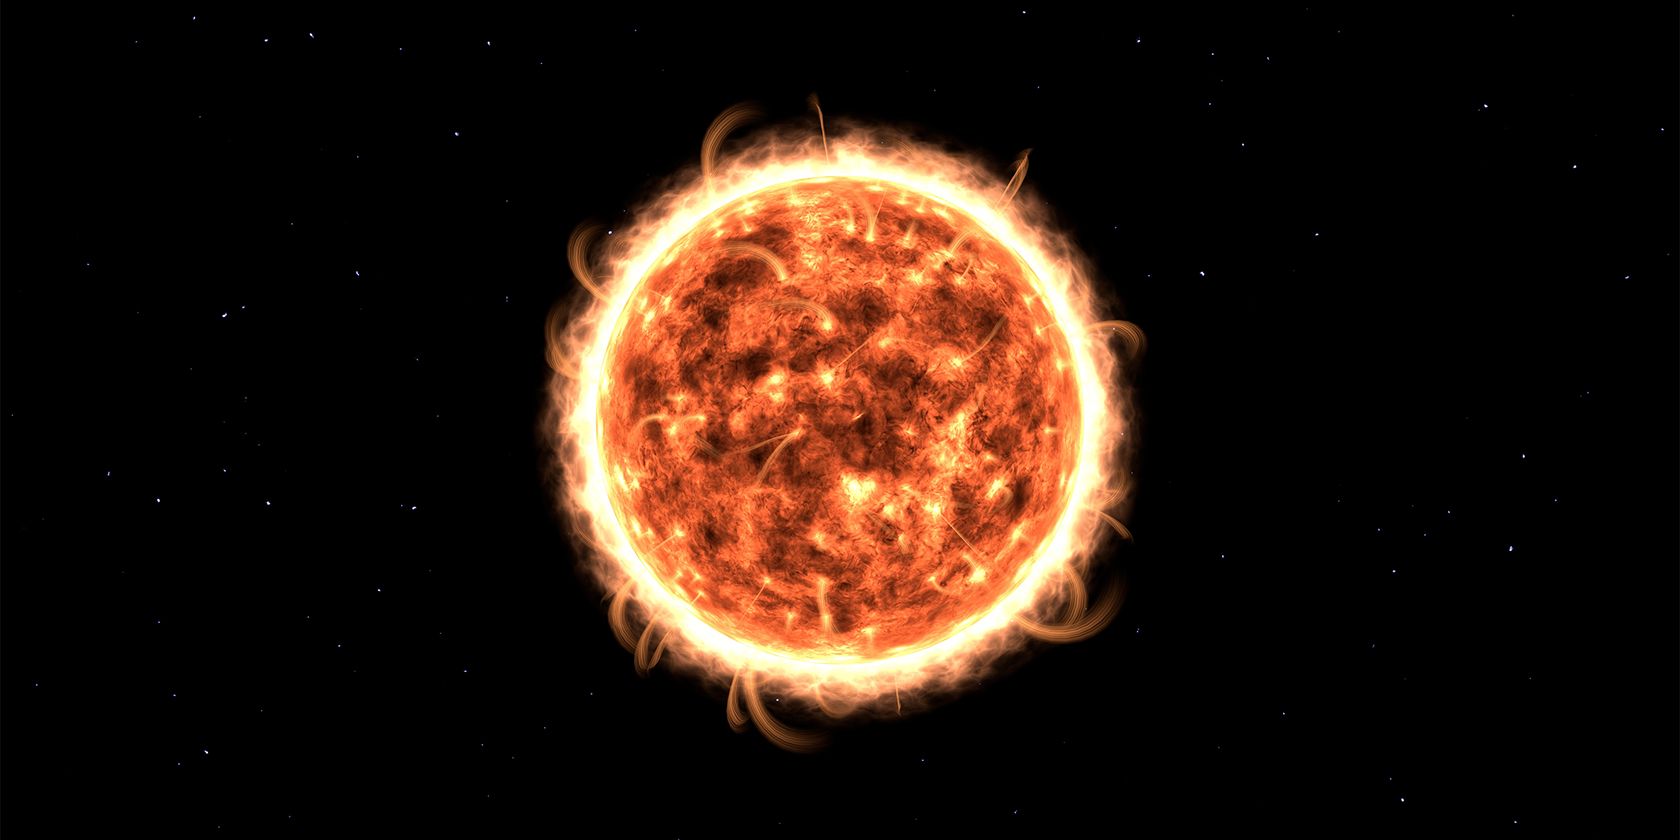 a 3d visualization of the sun